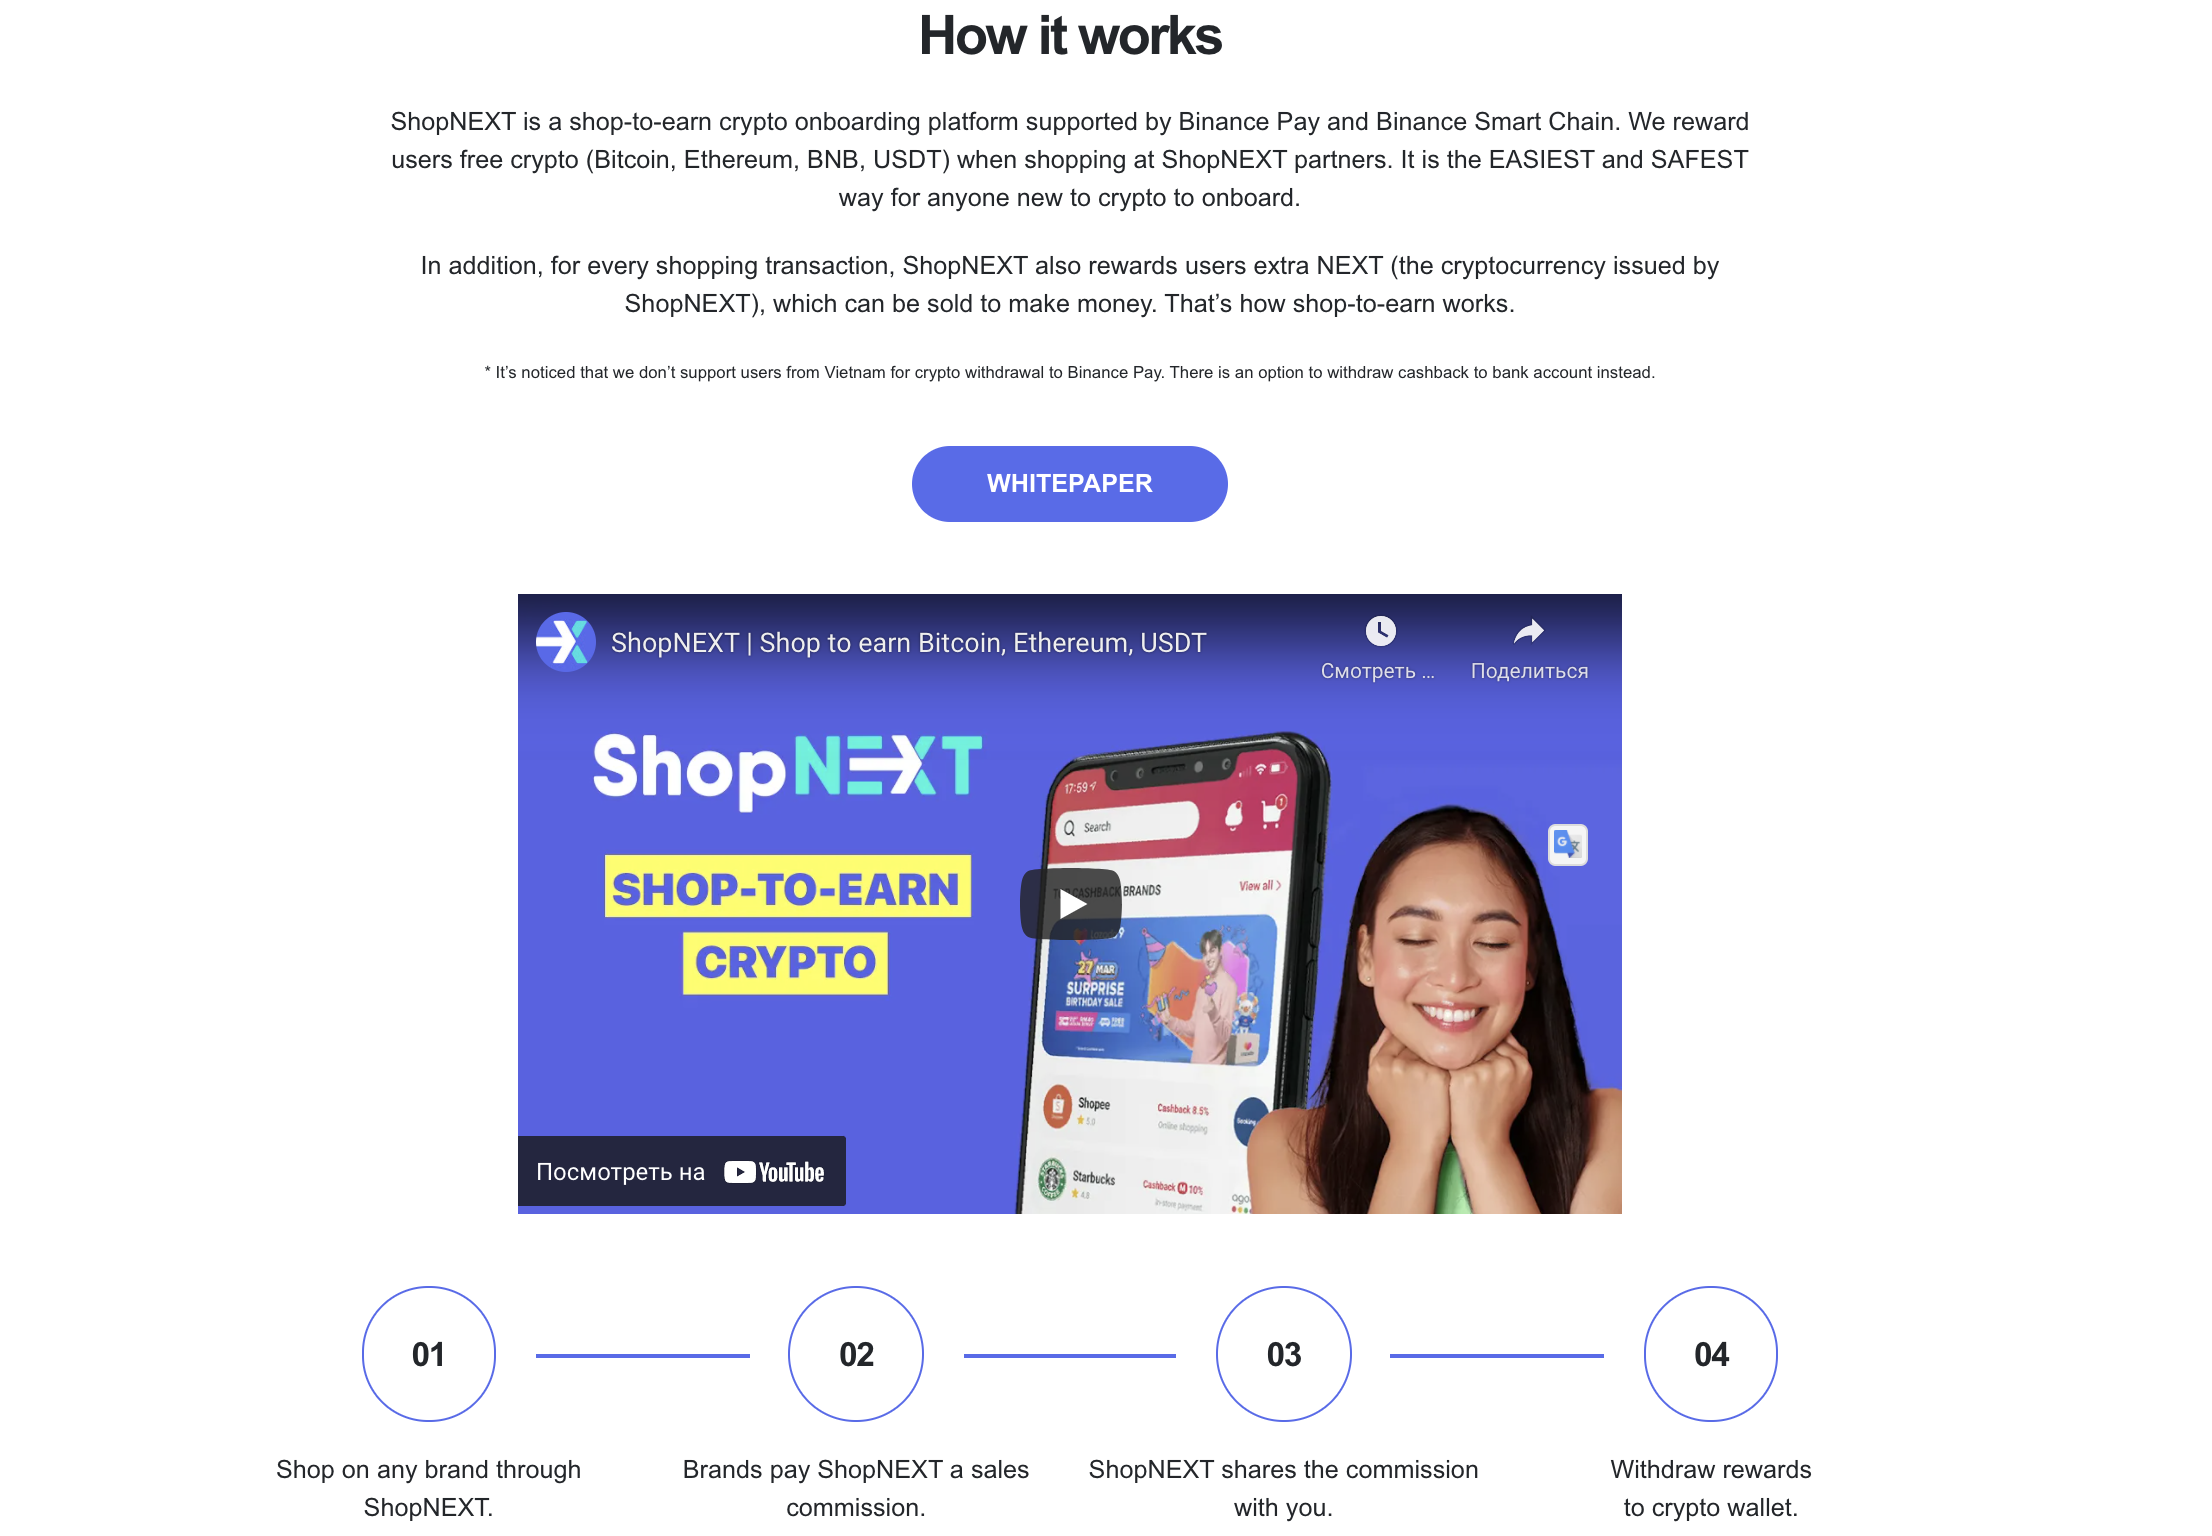 ShopNEXT How It Works